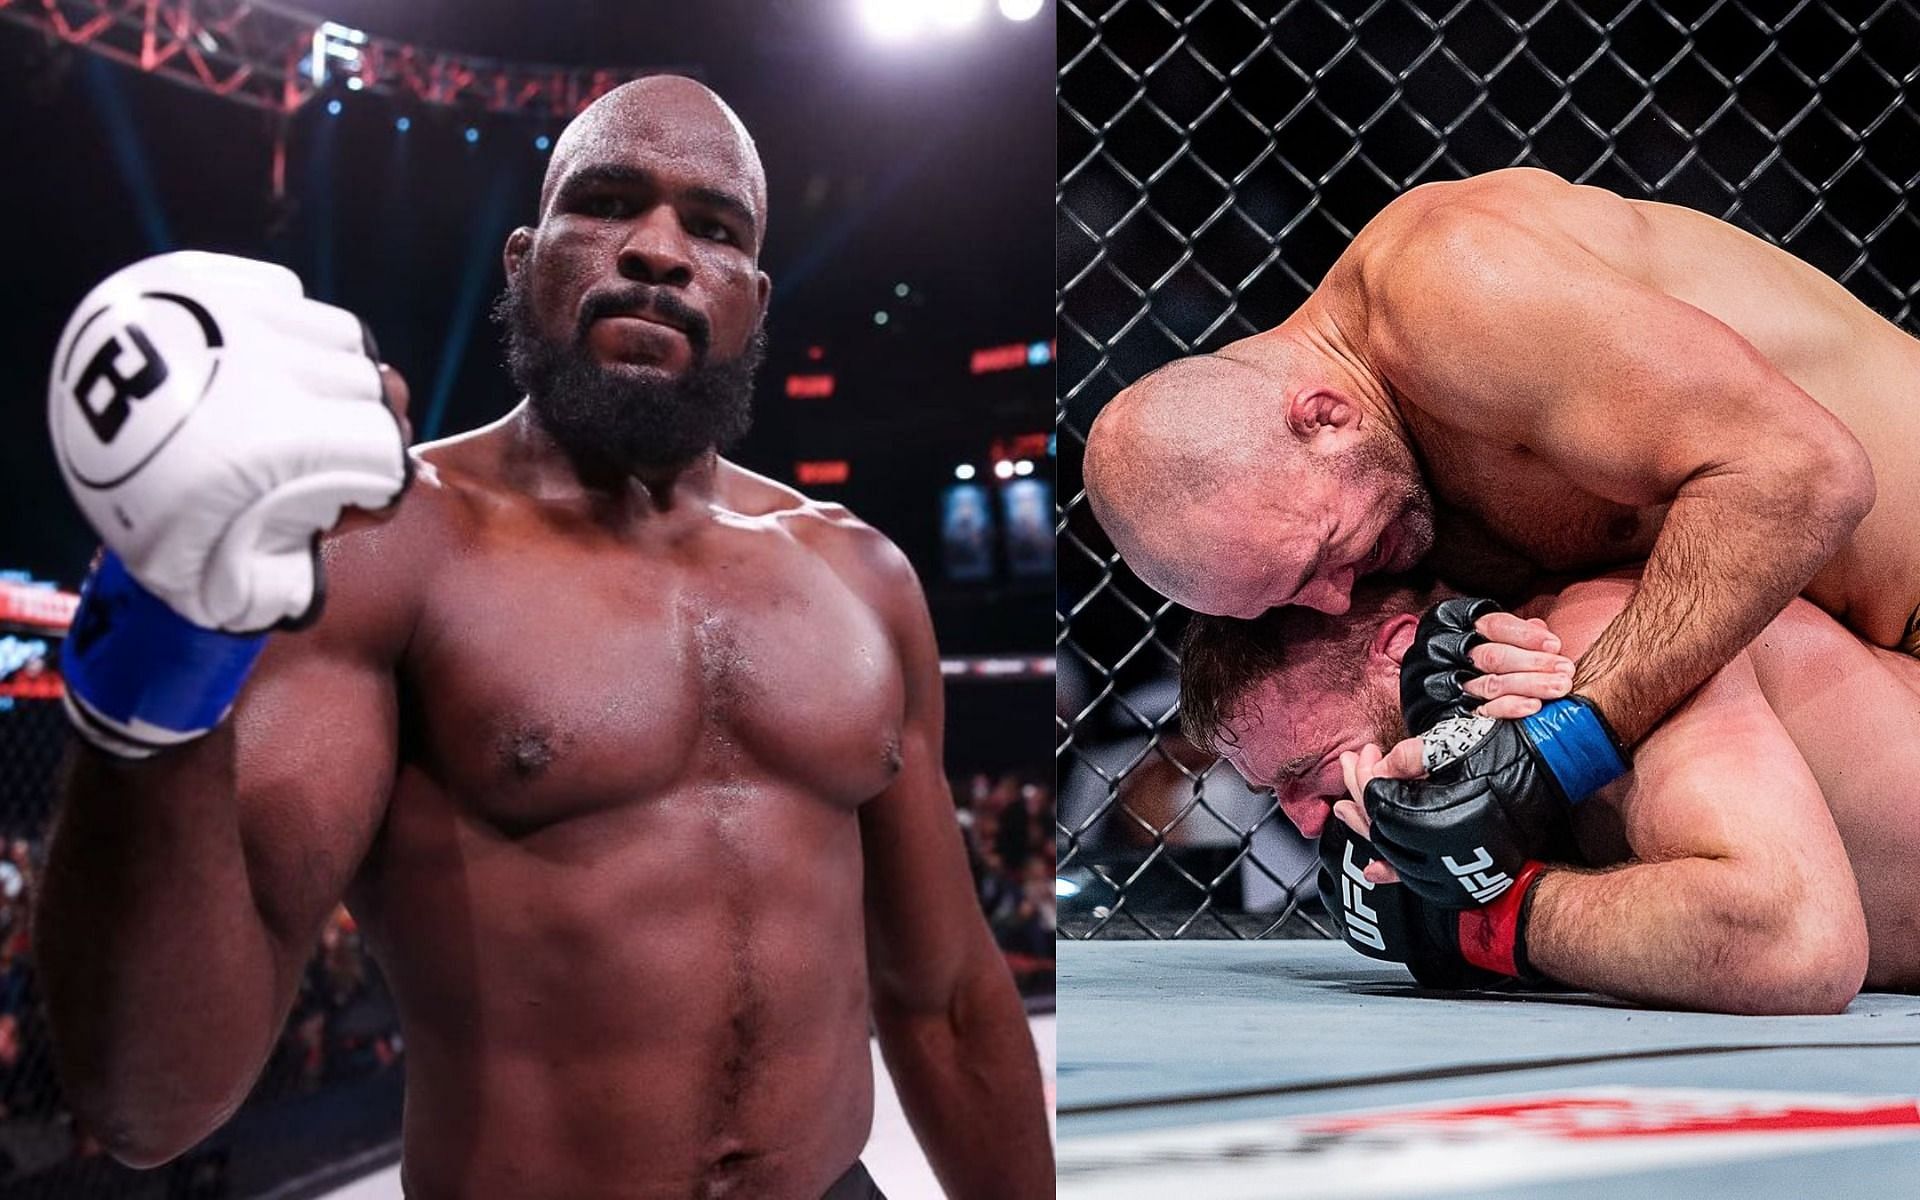 Corey Anderson (left) Jan Blachowicz &amp; Glover Teixeira (right) [Images courtesy: @coreya_mma @ufc on Instagram]